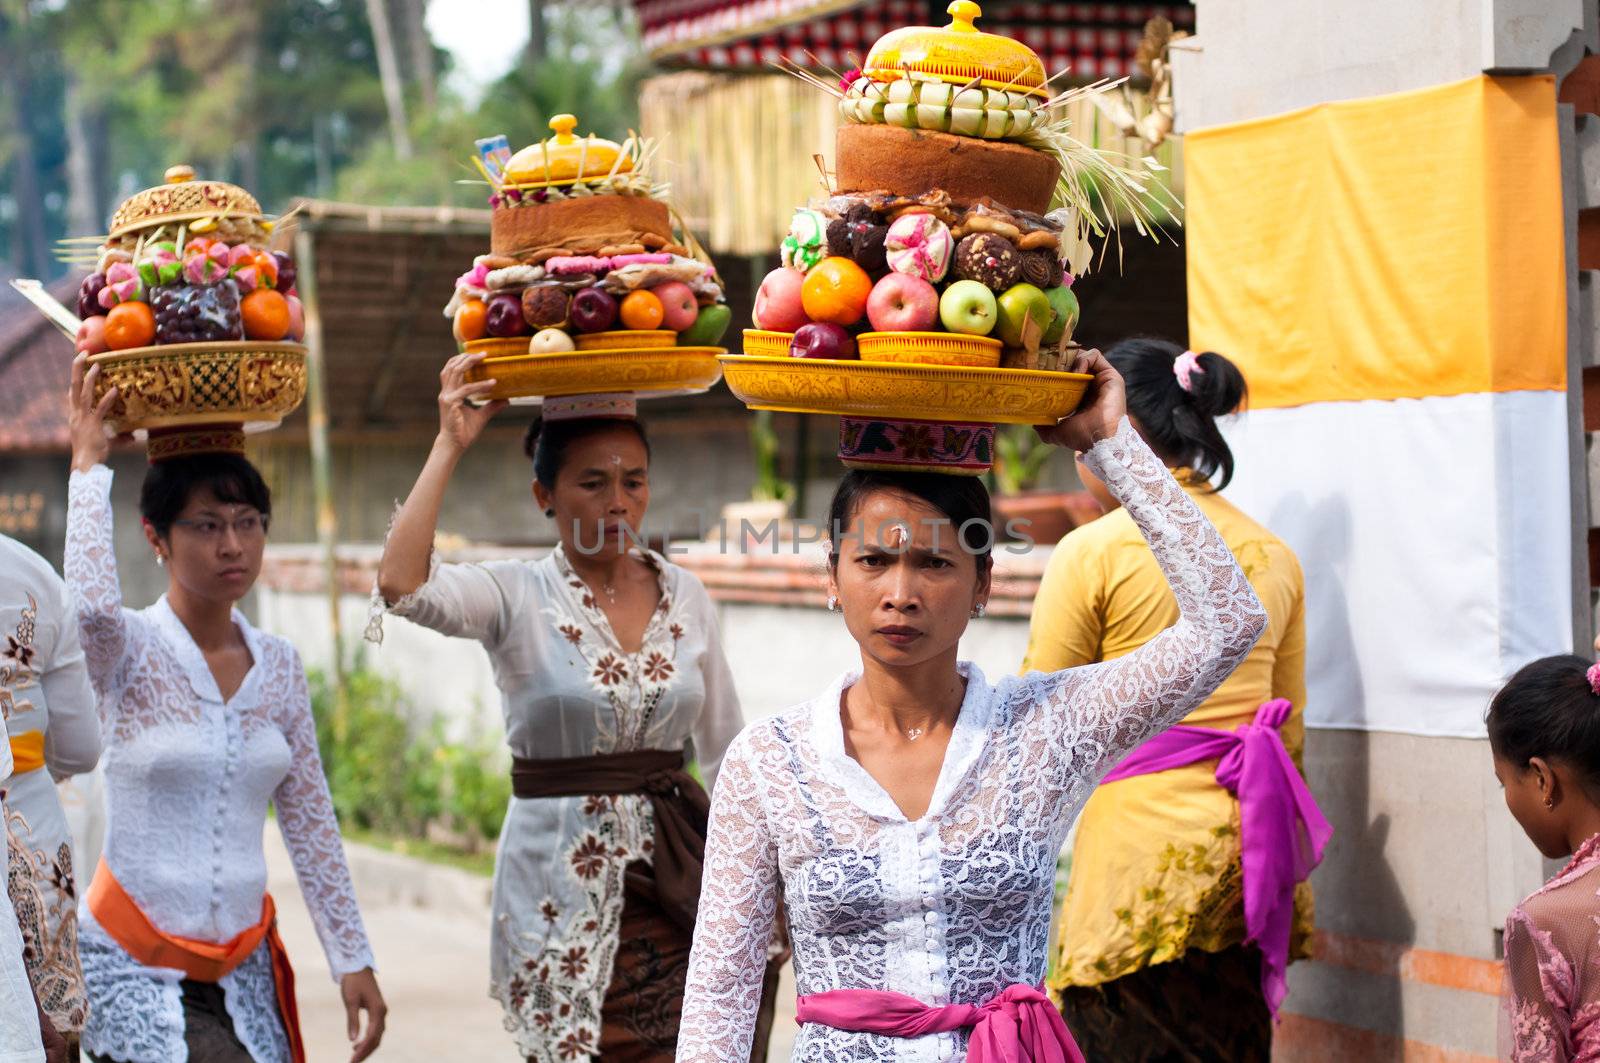 Balinese Woman Carrying Offerings On Her Head by nvelichko